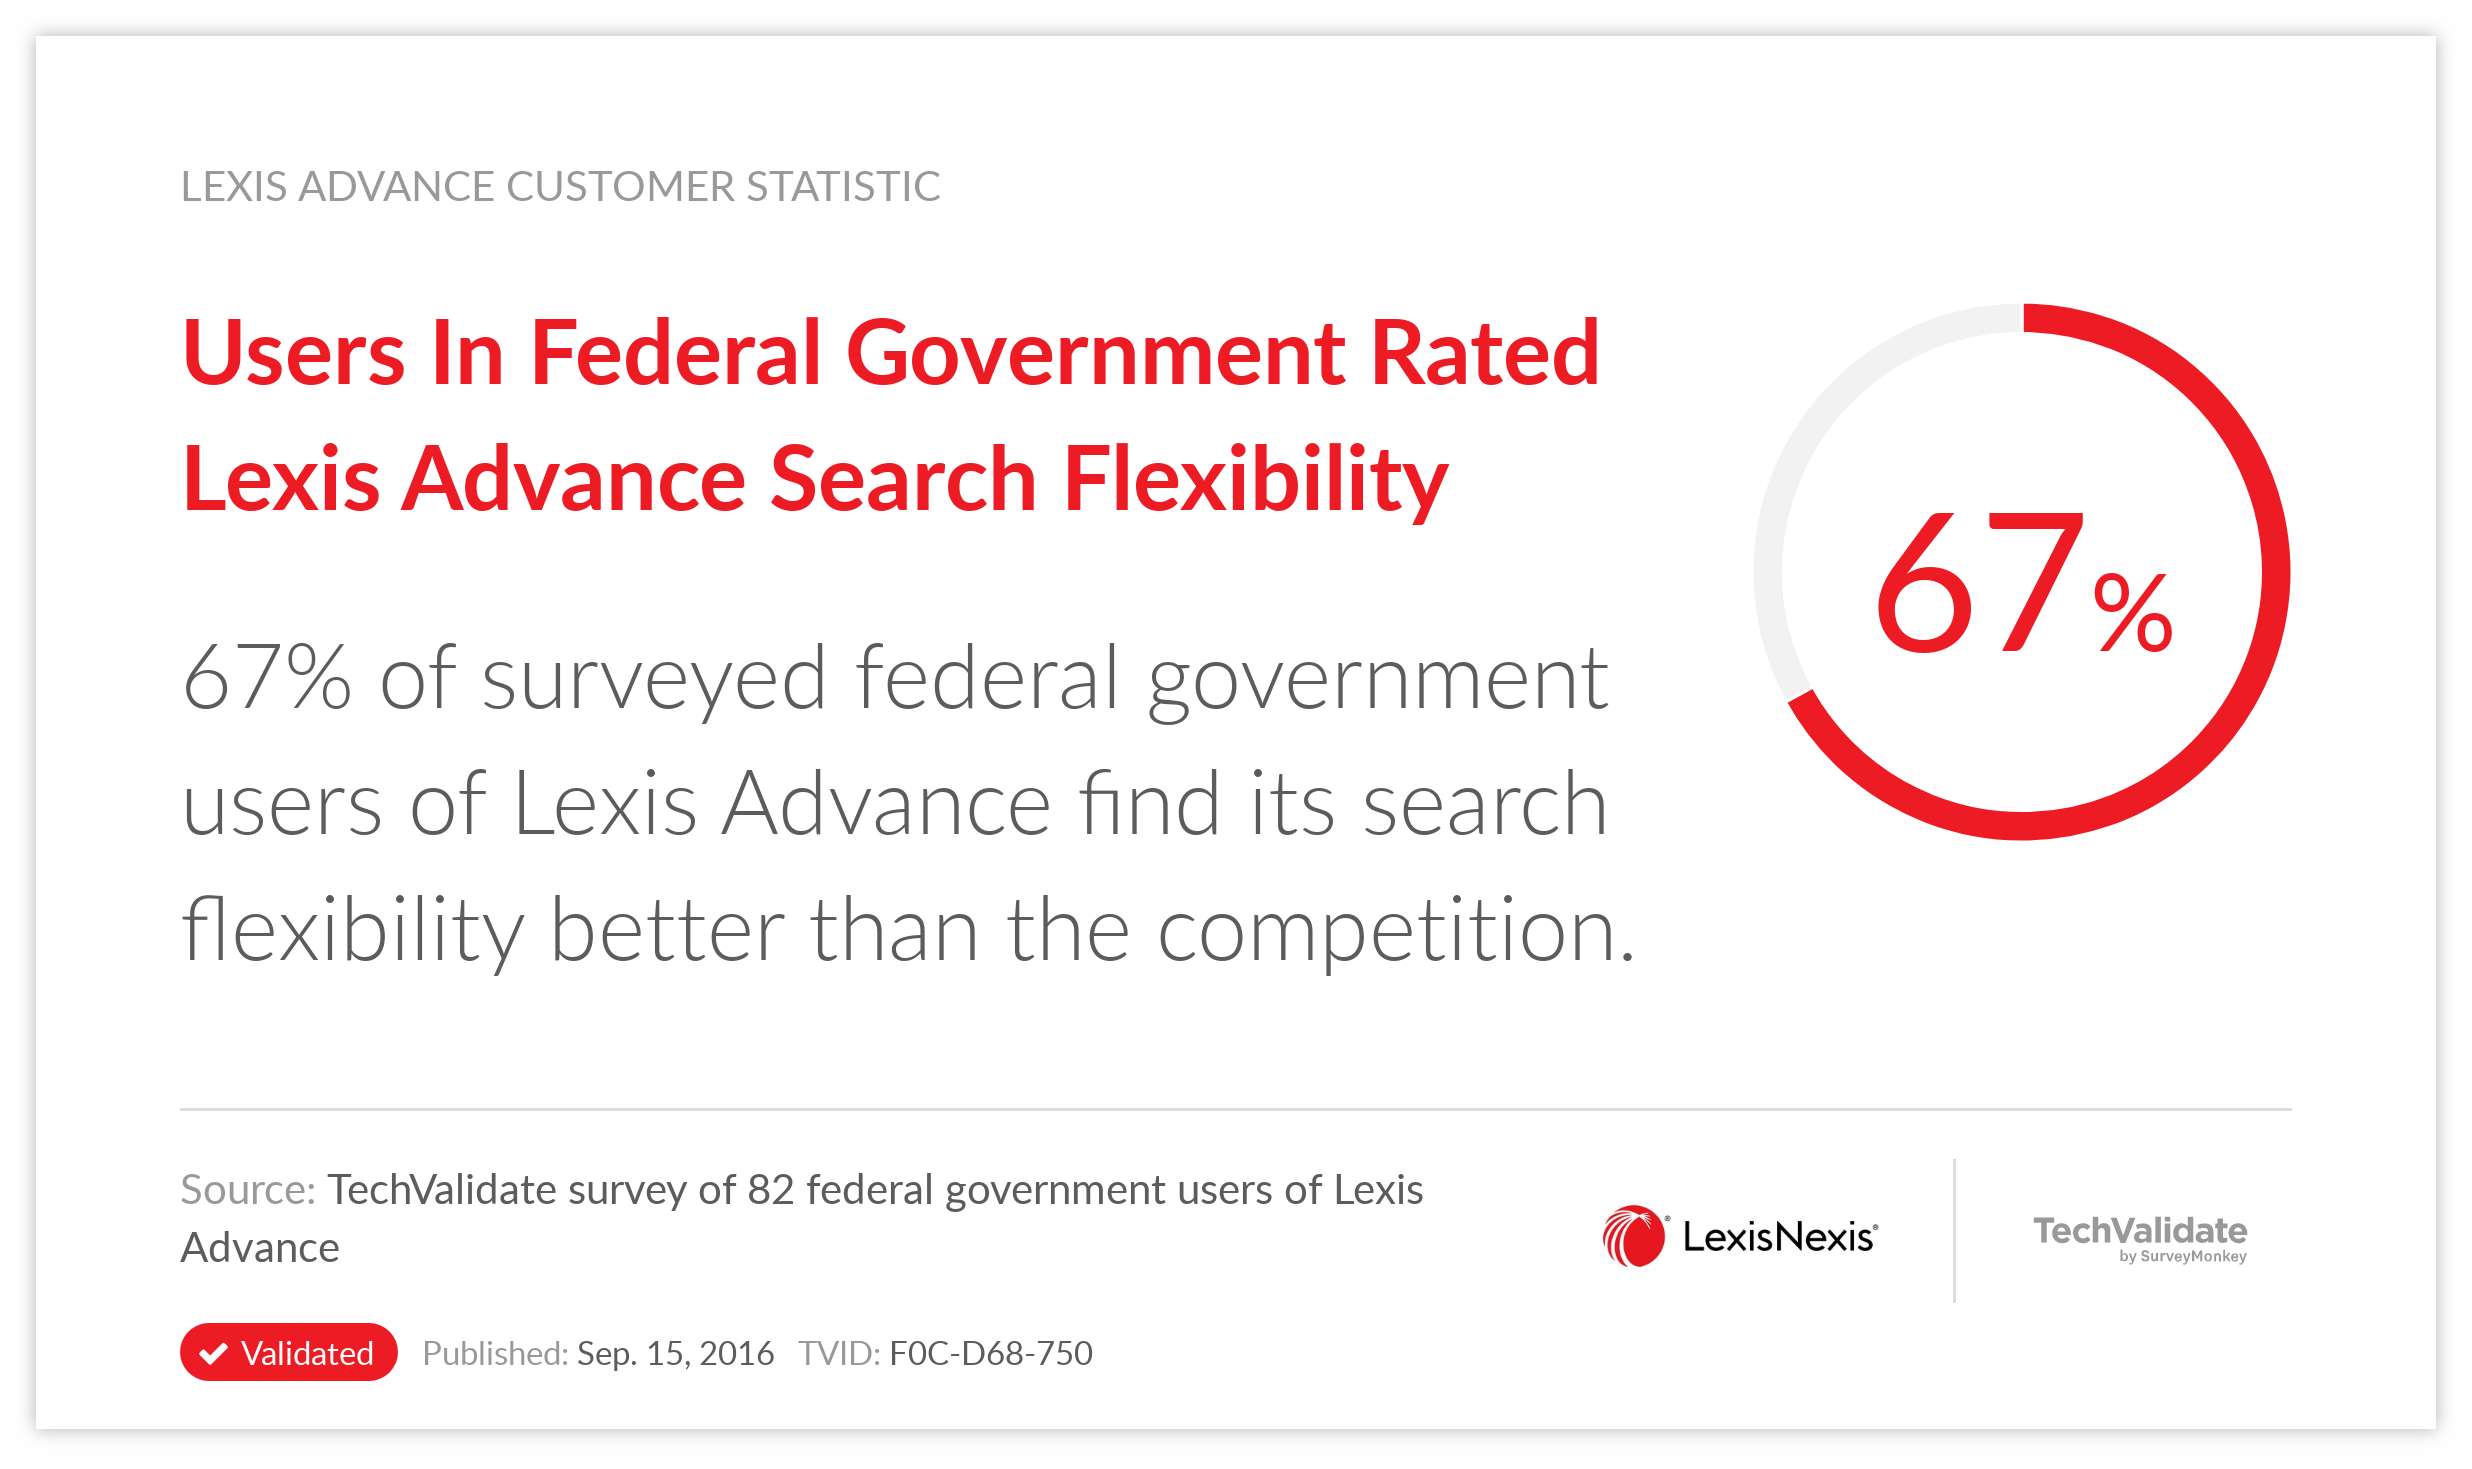 Users In Federal Government Rated Lexis Advance Search Flexibility